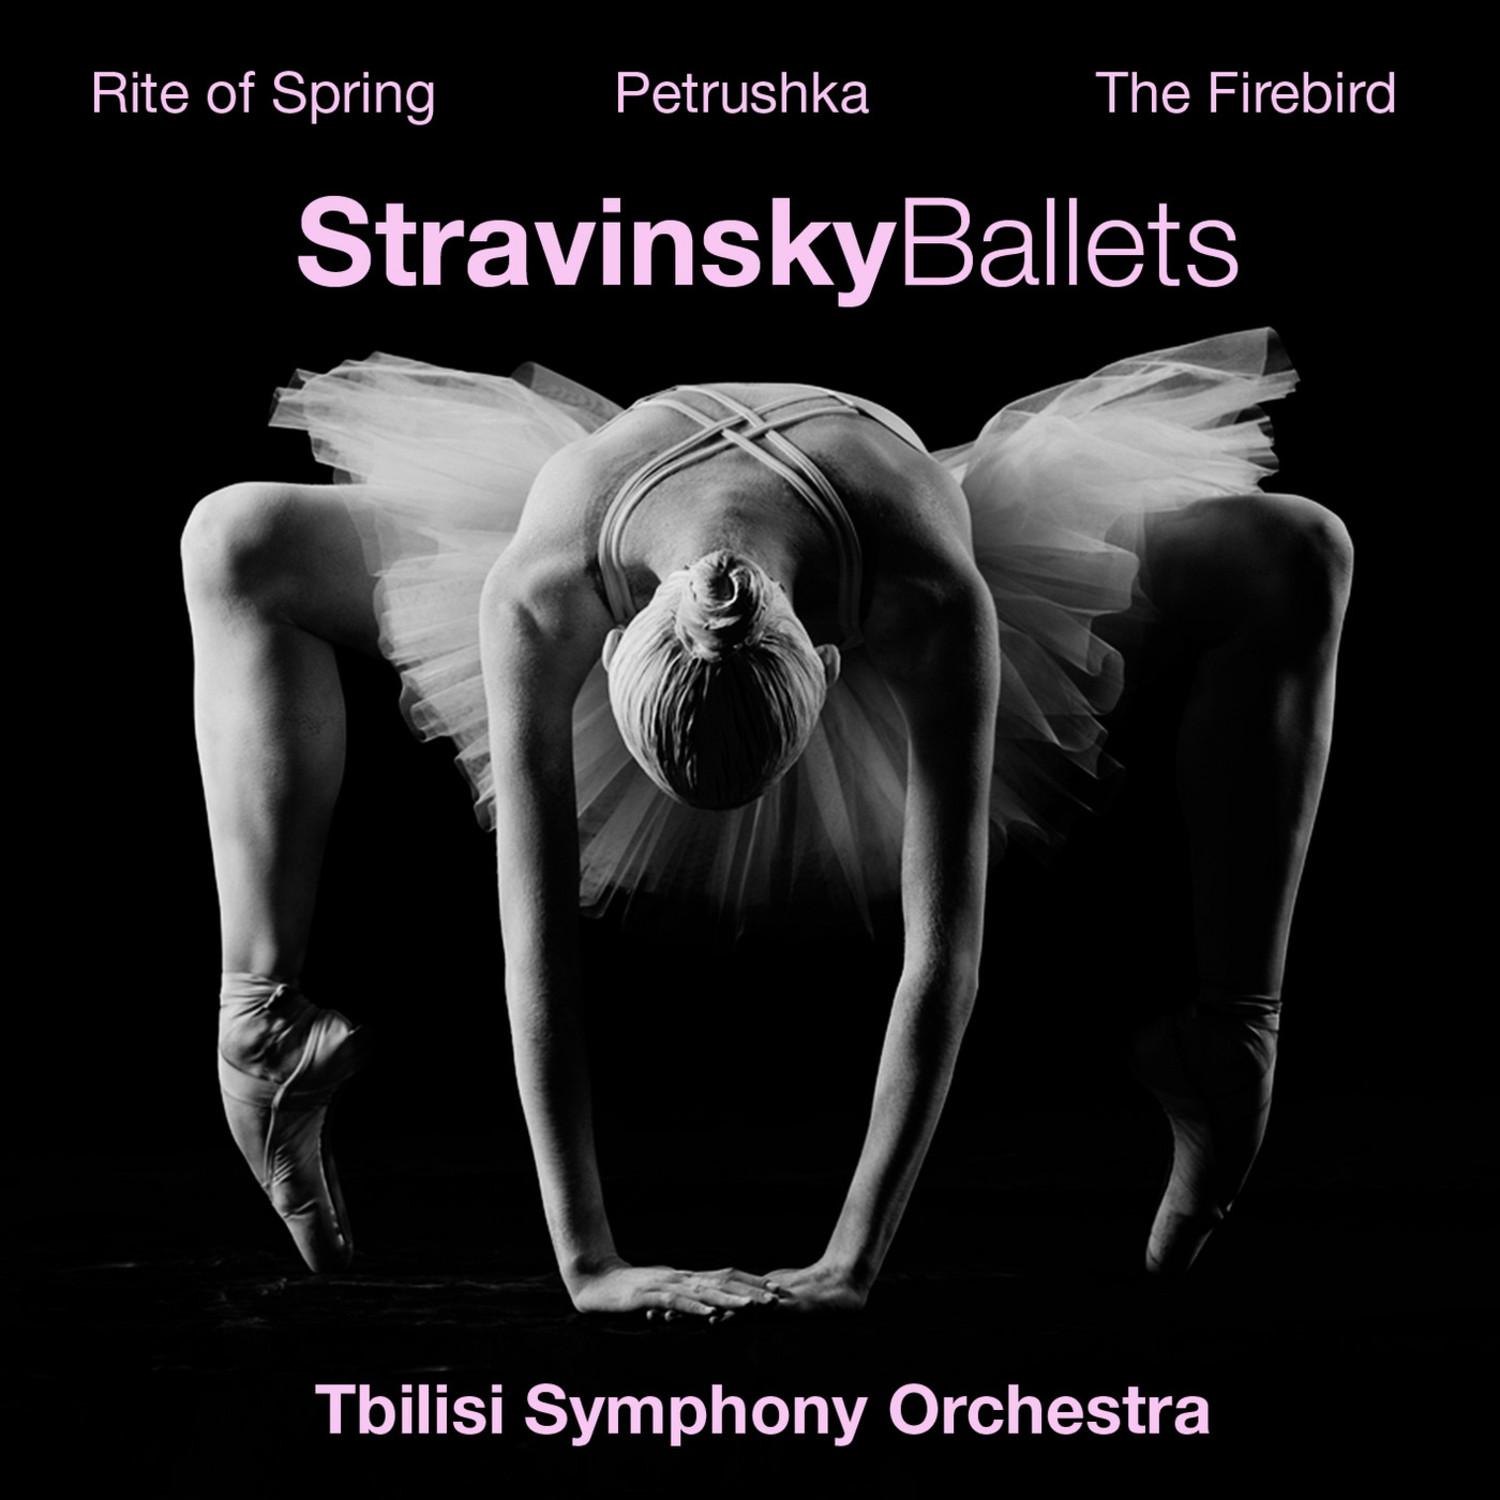 Petrushka Ballet Suite - Burlesque in Four Scenes: Part I. The Shrovetide Fair: III. The Charlatan's Booth